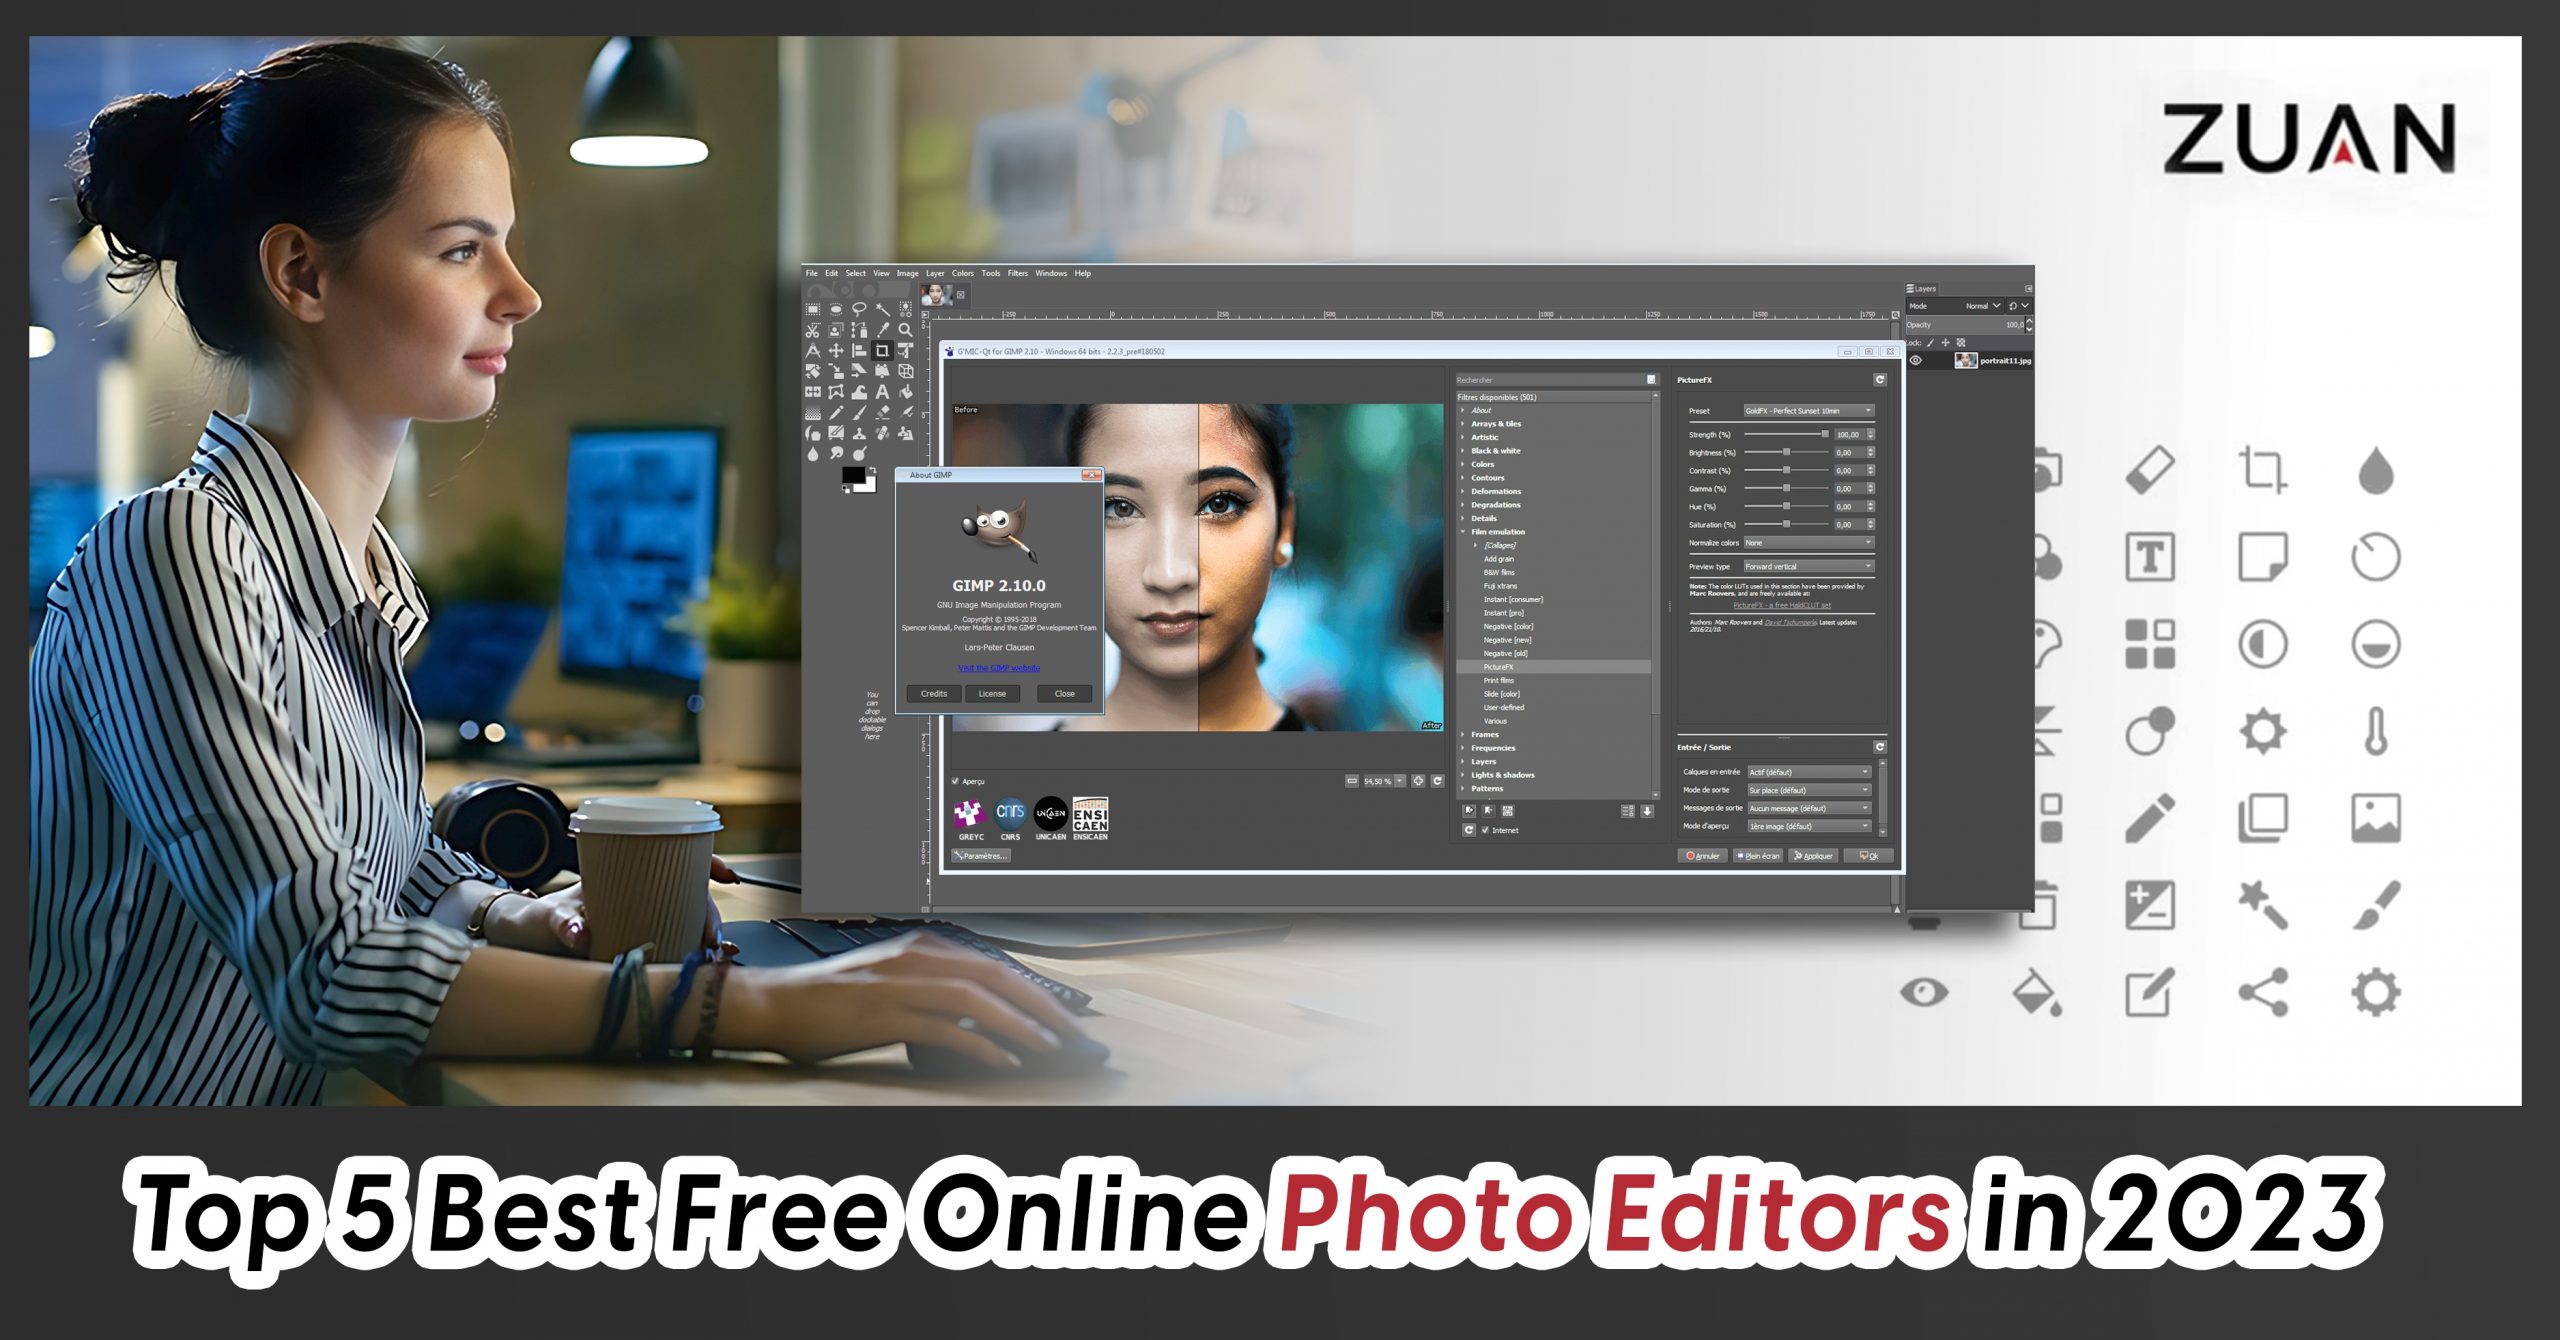 The Best Photo Editing Software for 2023